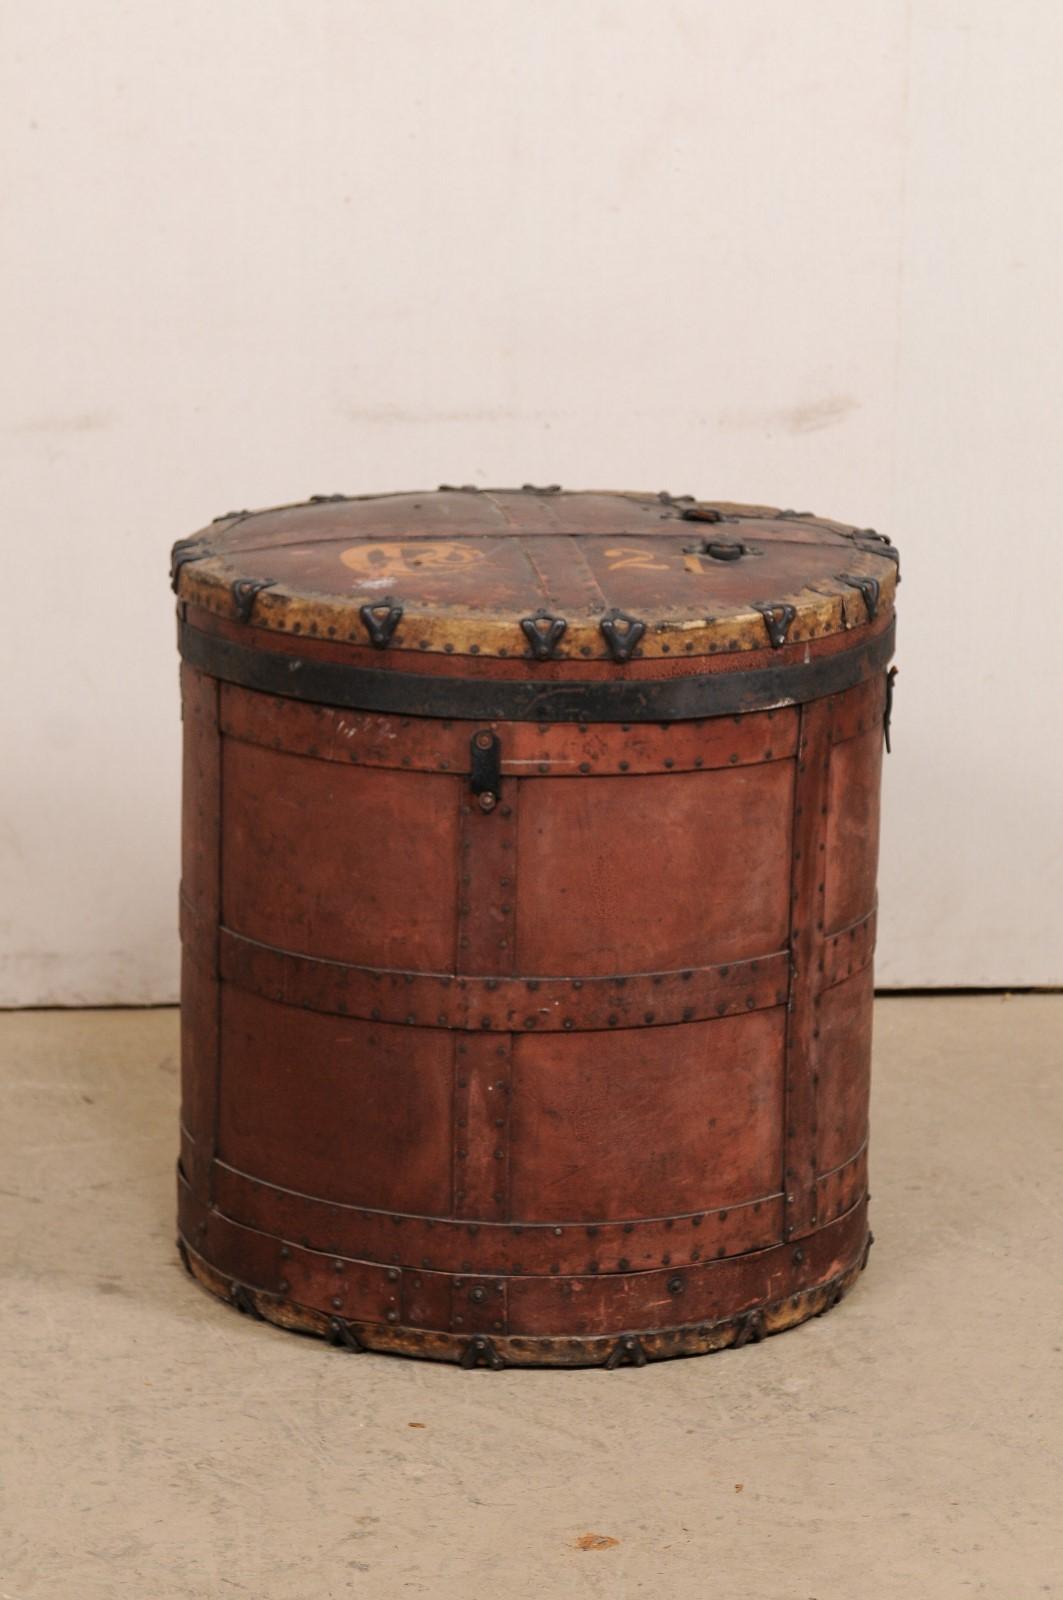 A European drum-shaped storage container with lid top from the early 20th century. This antique storage vessel from Europe stands approximately 29.25